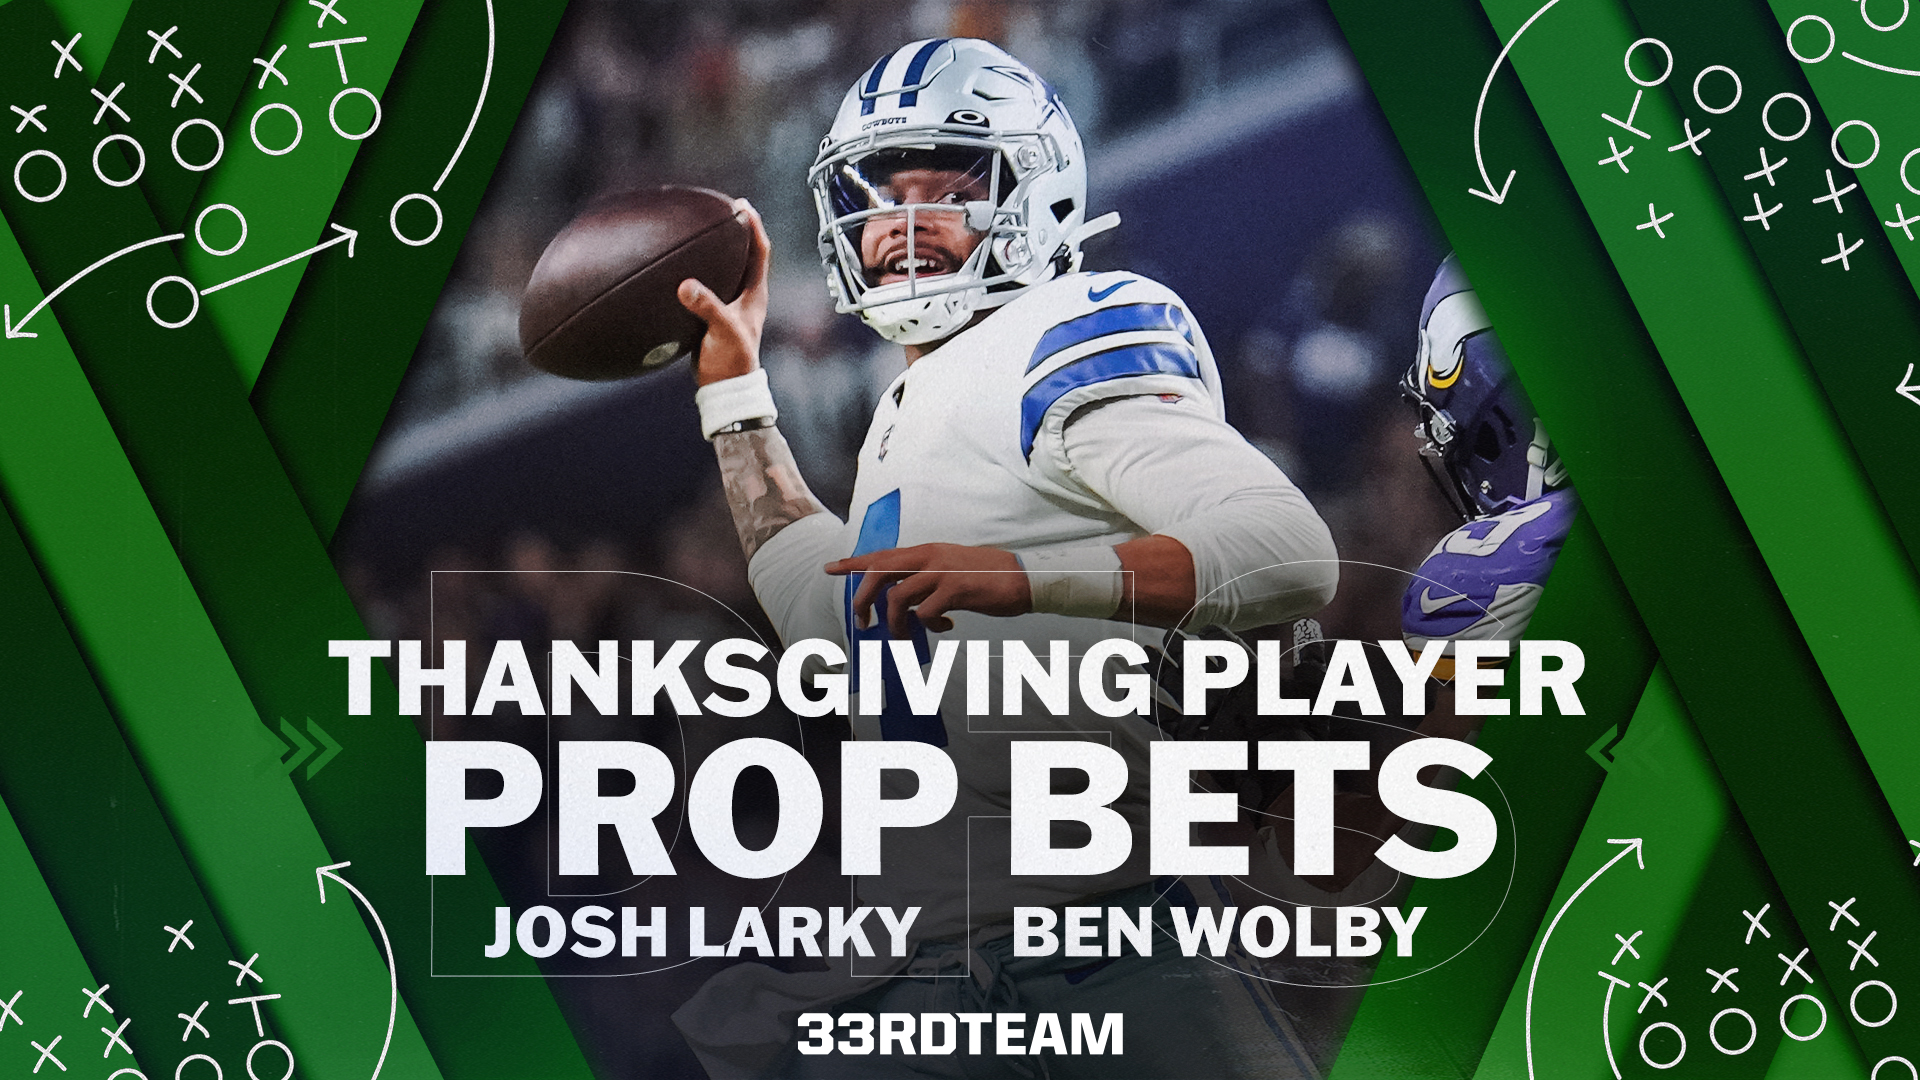 Josh Larky & Ben Wolby’s Thanksgiving Player Props